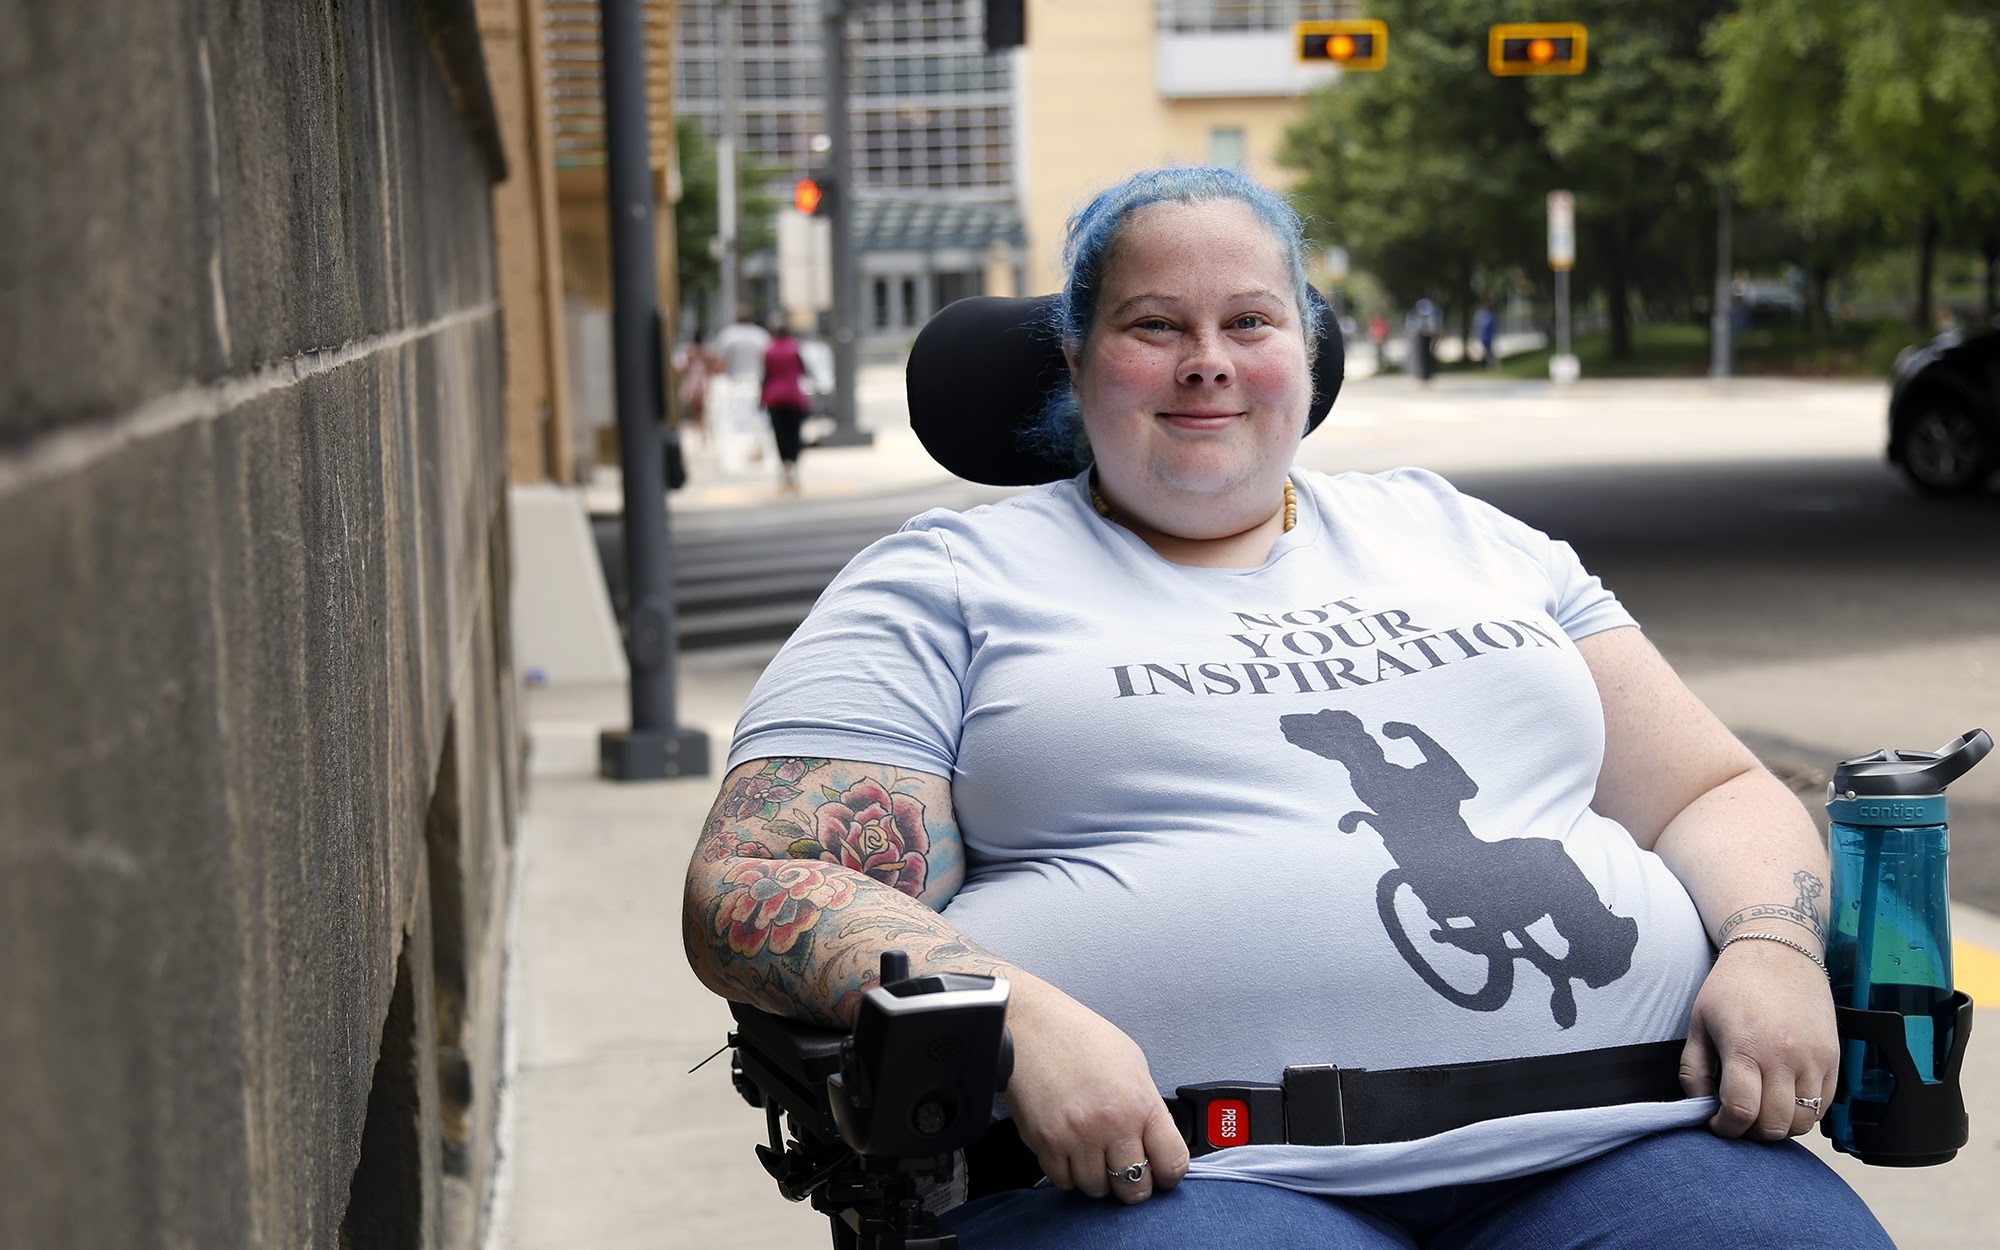 Photograph of Alisa Grisham outside on the sidewalk with the street behind her. She is in her wheelchair and wearing a T-shirt that says “not your inspiration” and below it is a silhouette of a person in a wheelchair.